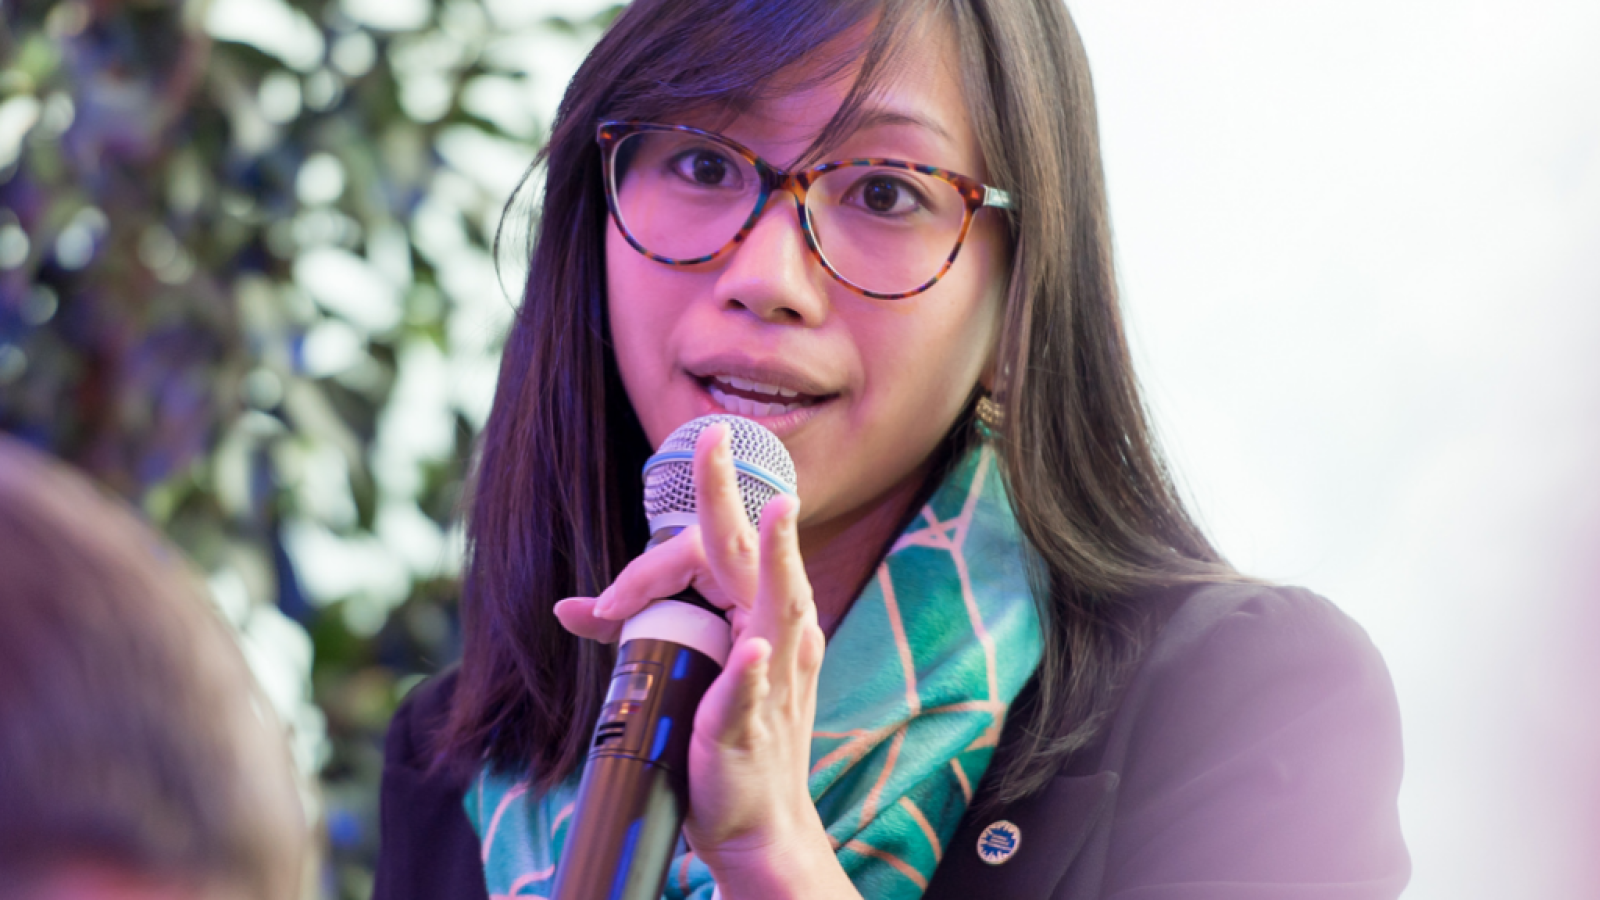 An image of Tiffany Yu (B'10) speaking into a microphone at an event.